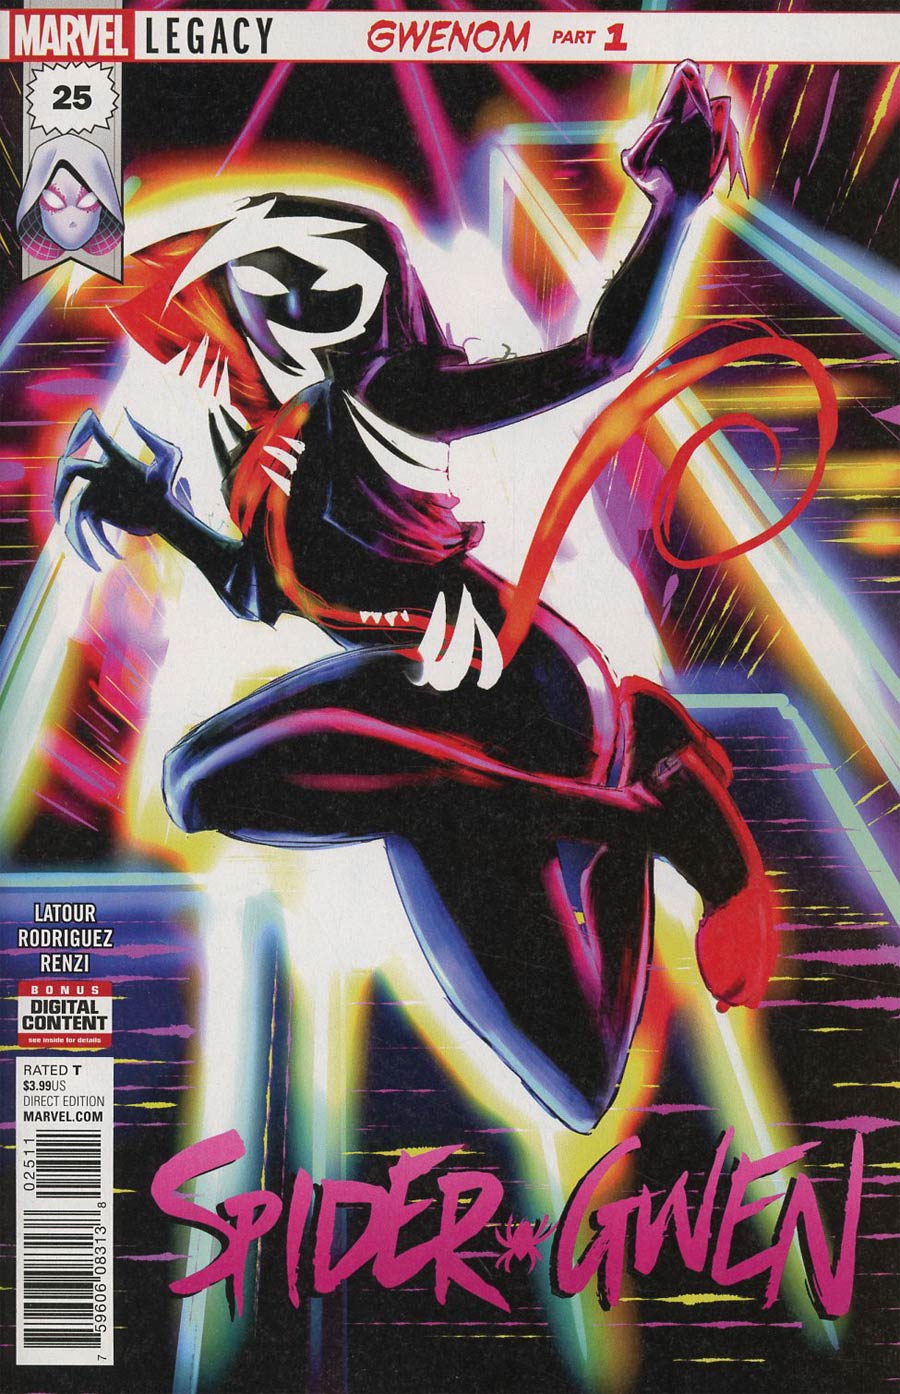 Spider-Gwen Vol 2 #25 Cover A 1st Ptg Regular Robbi Rodriguez Cover (Marvel Legacy Tie-In)